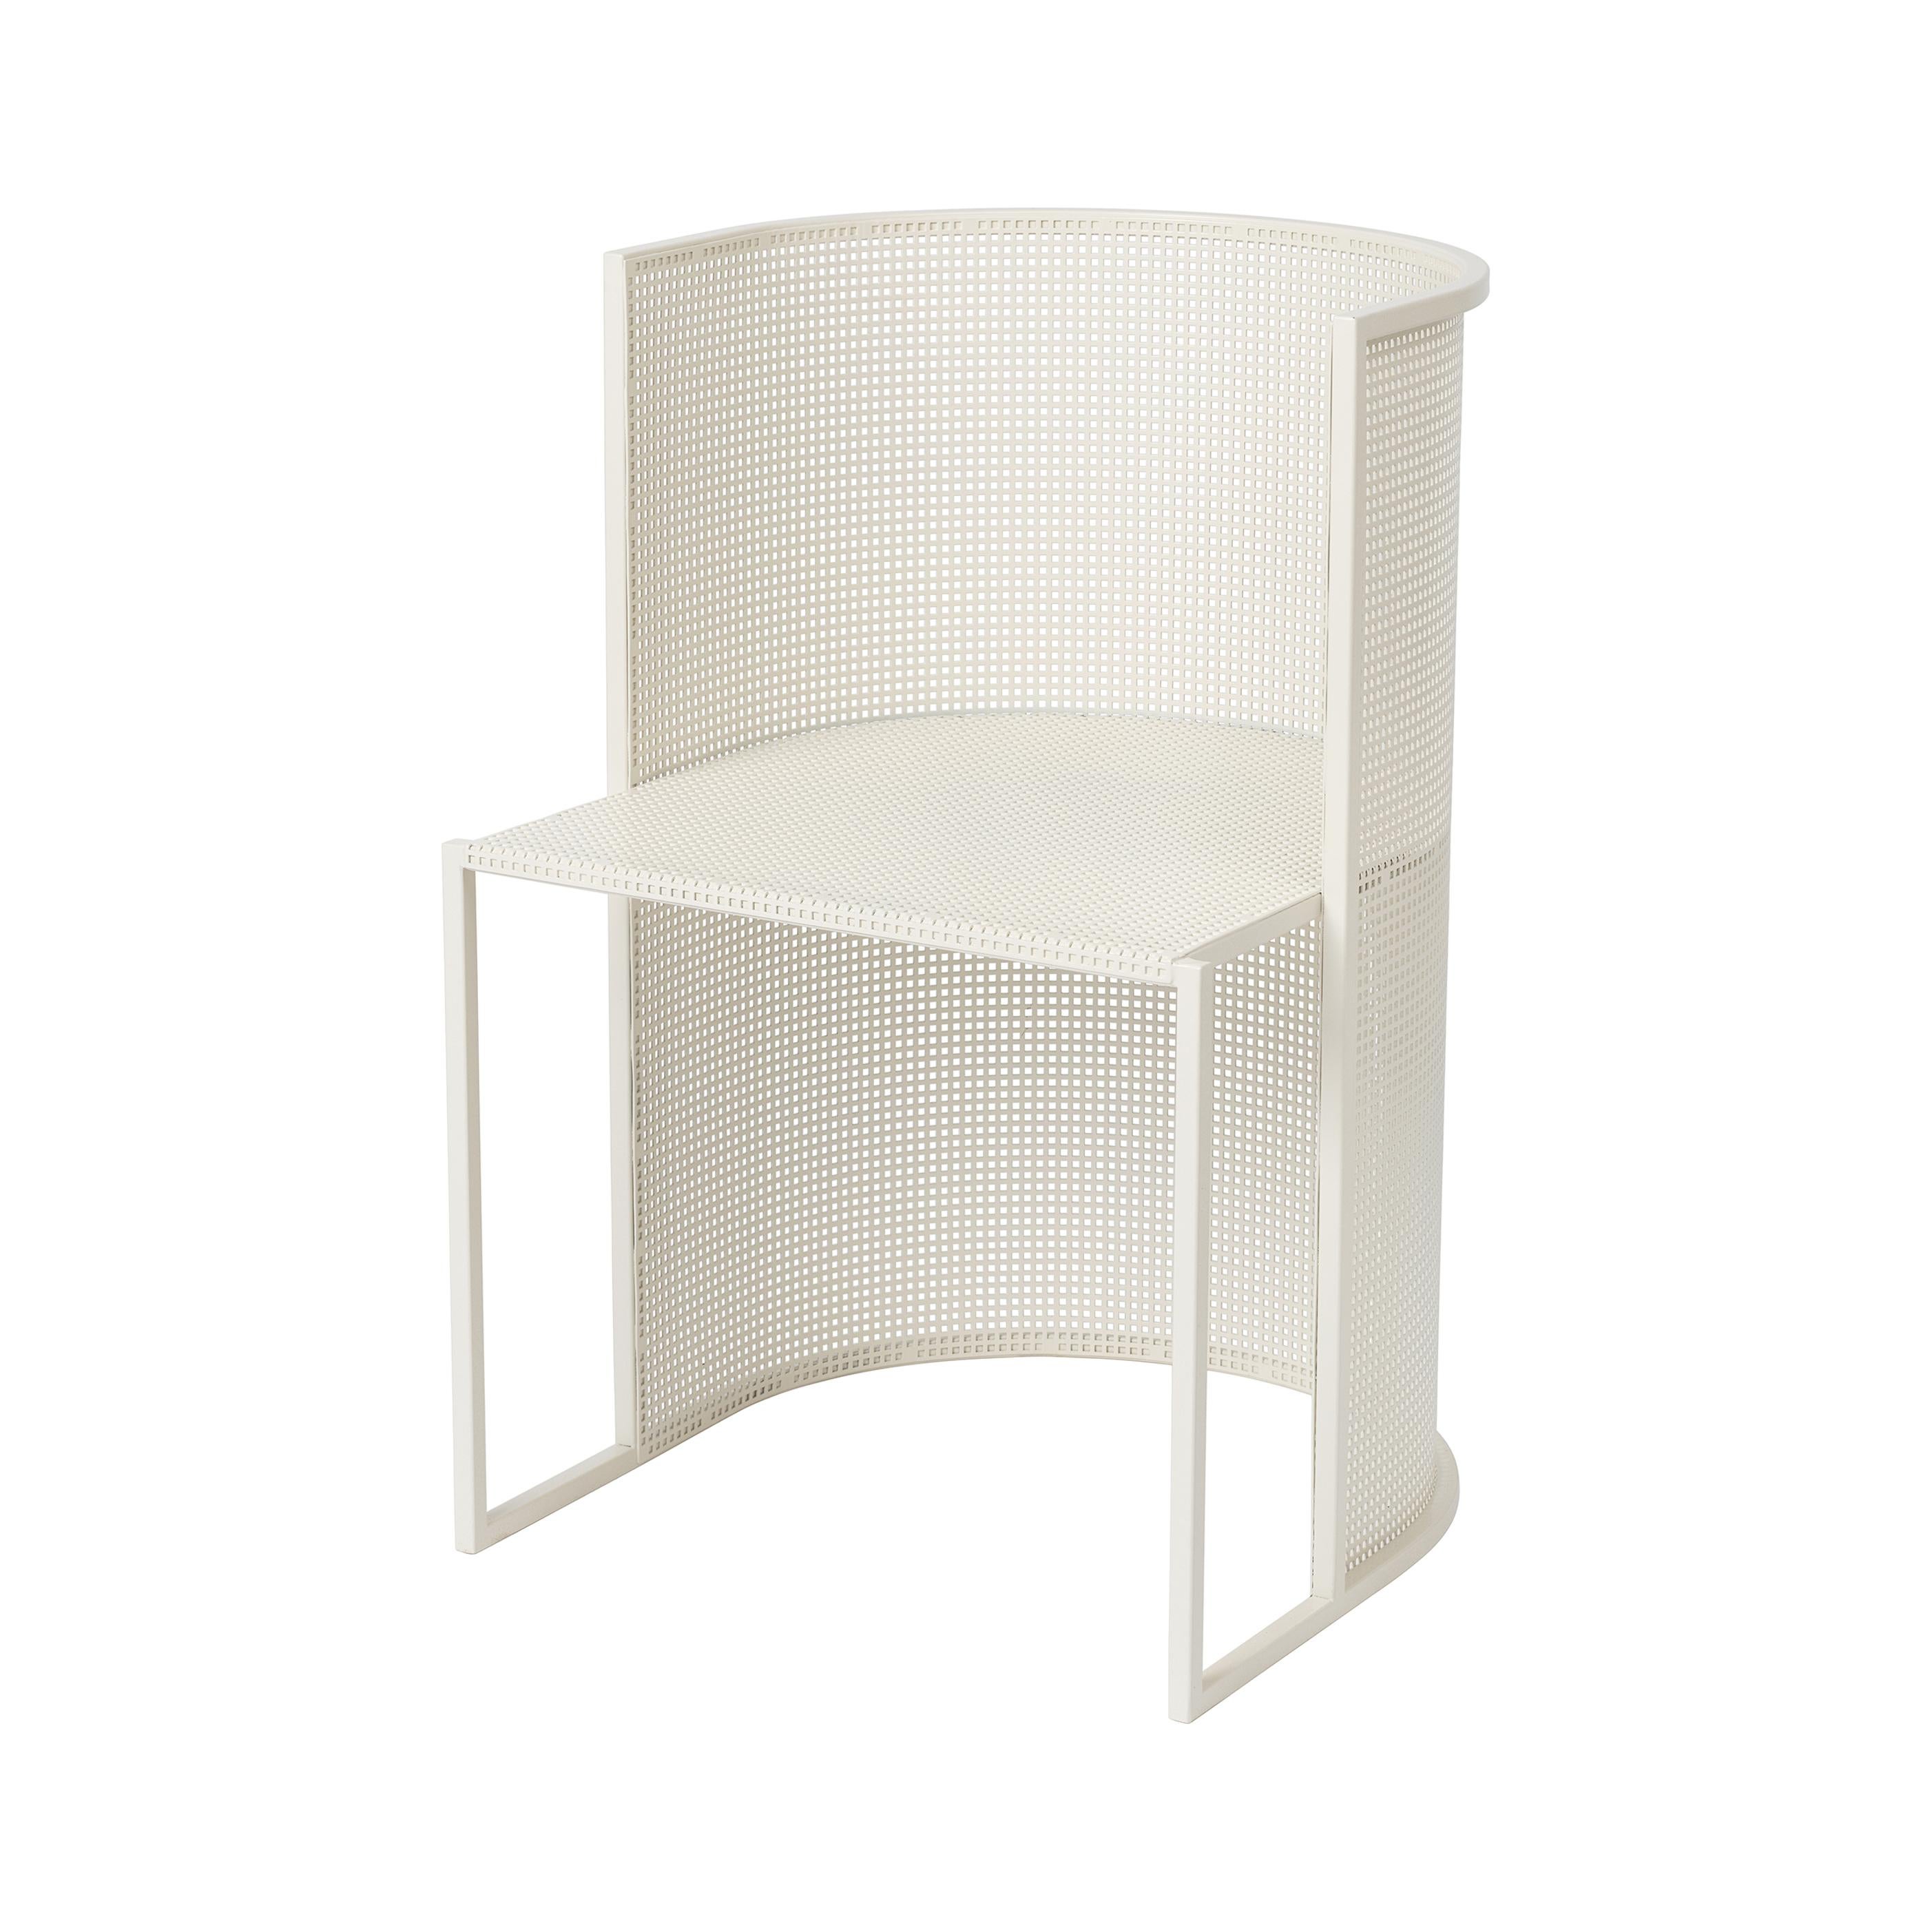 Steel Bahaus dining chair by Kristina Dam Studio
Materials: Beige outdoor powder-coated steel
Dimensions: 77 x 53 x 51 cm

Dimensions cannot be customized.

*Safe to use outdoor.

Kristina Dam graduated from The Royal Danish School of Fine